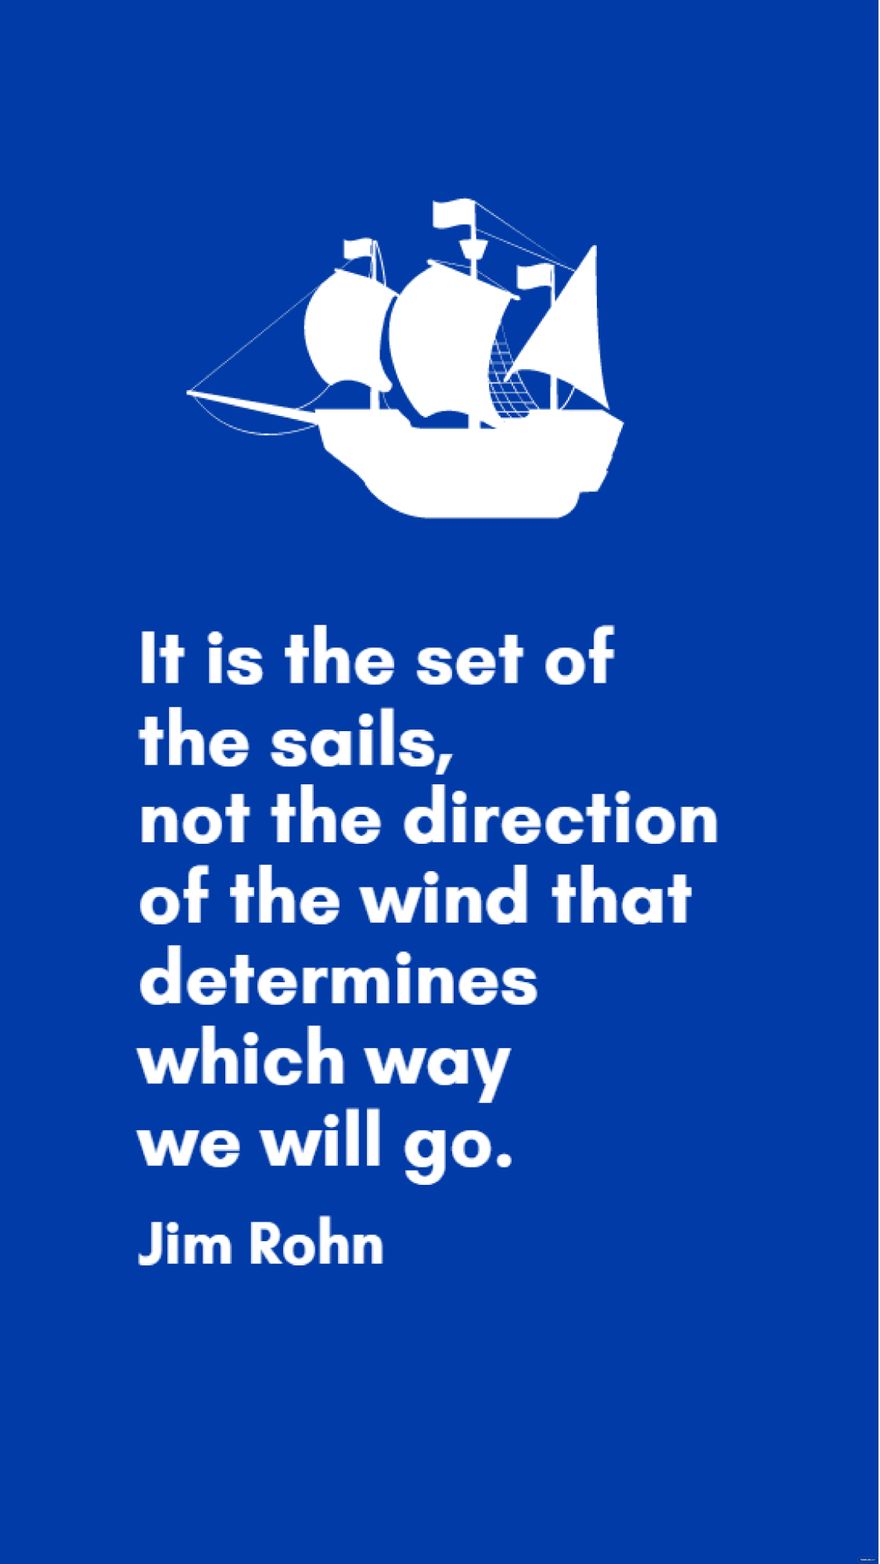 Jim Rohn - It is the set of the sails, not the direction of the wind that determines which way we will go.